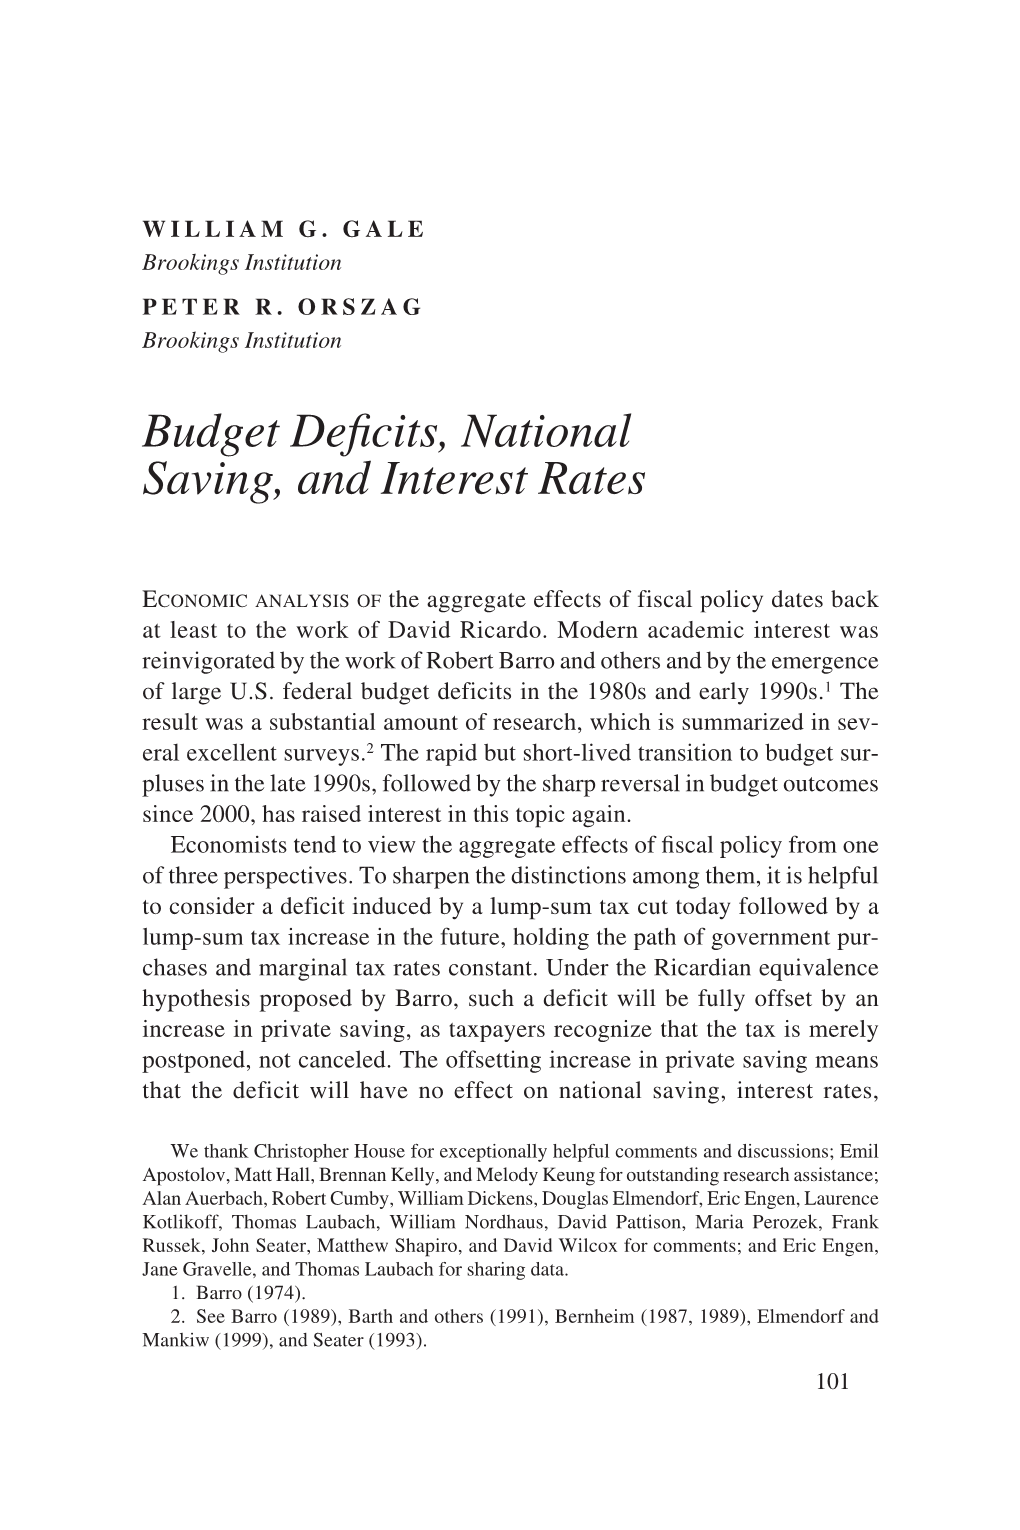 Budget Deficits, National Saving, and Interest Rates